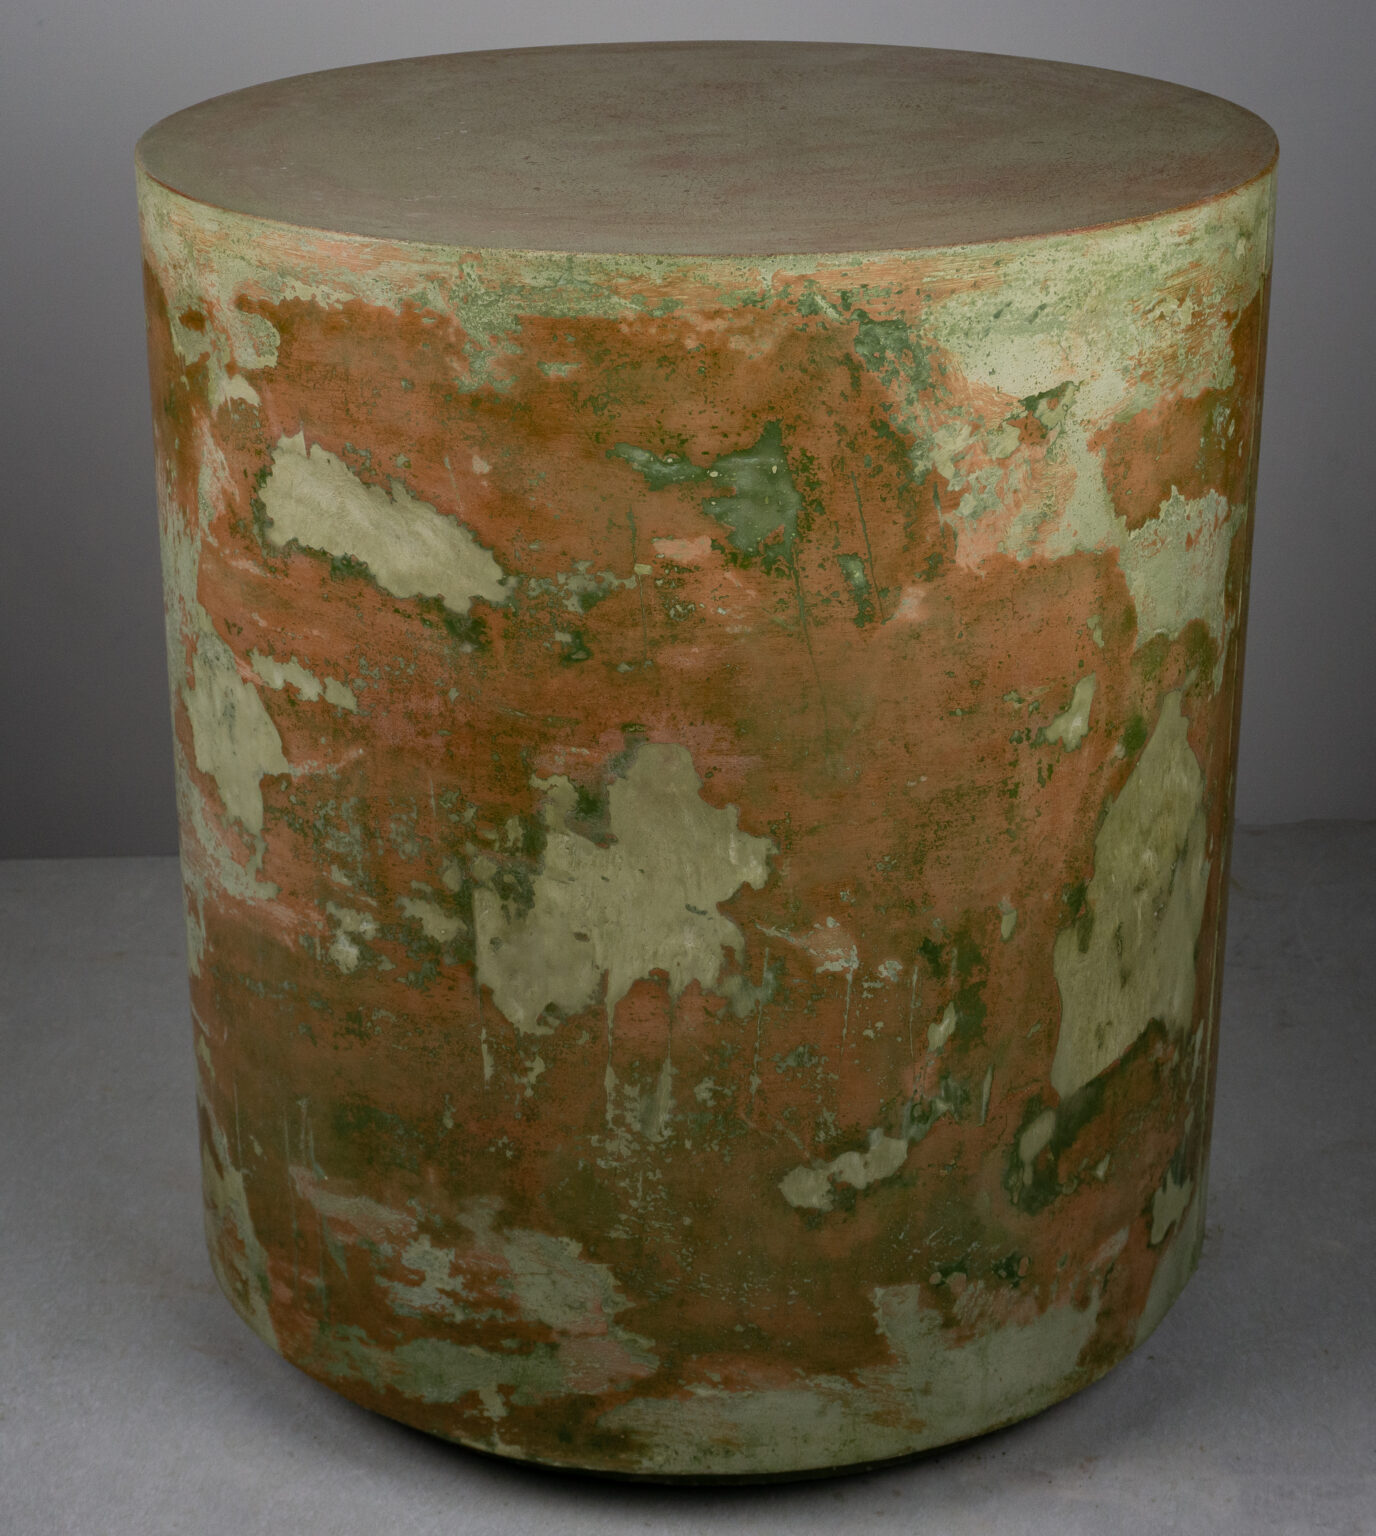 venetian plaster-like concrete side table with reds and greens, side shot